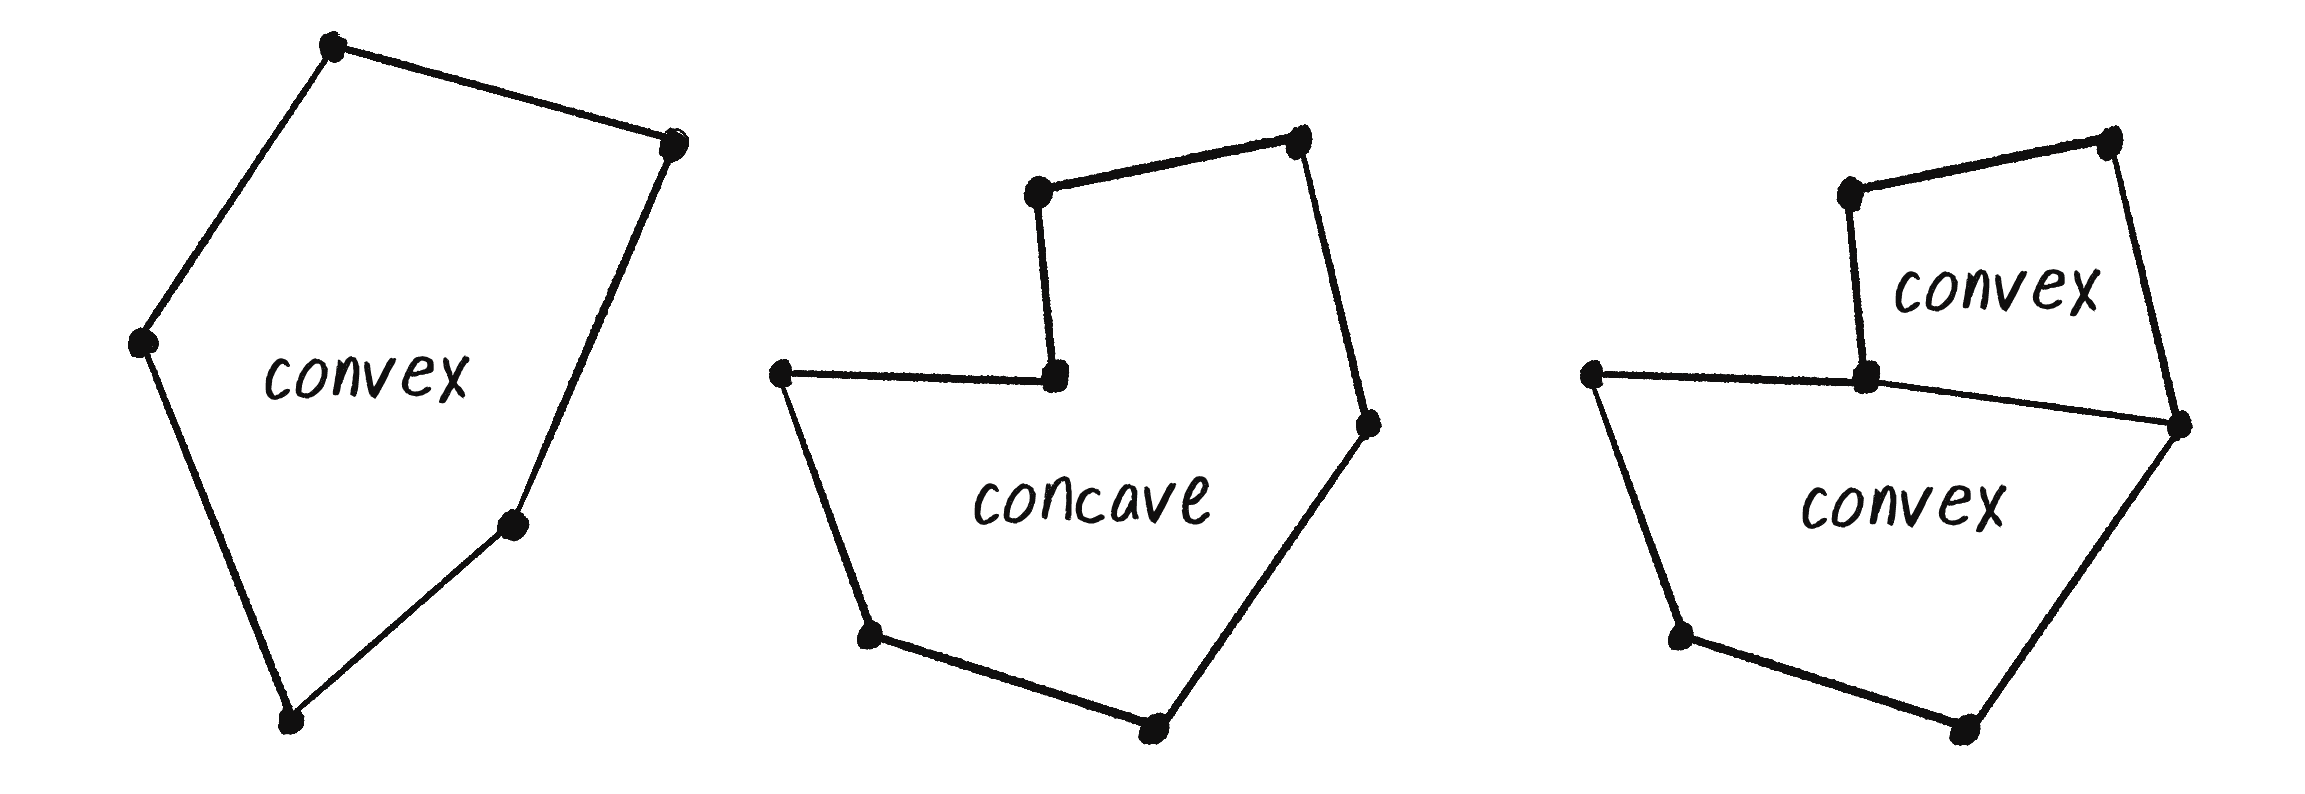 Figure 6.6: A concave shape can be drawn with multiple convex shapes. 